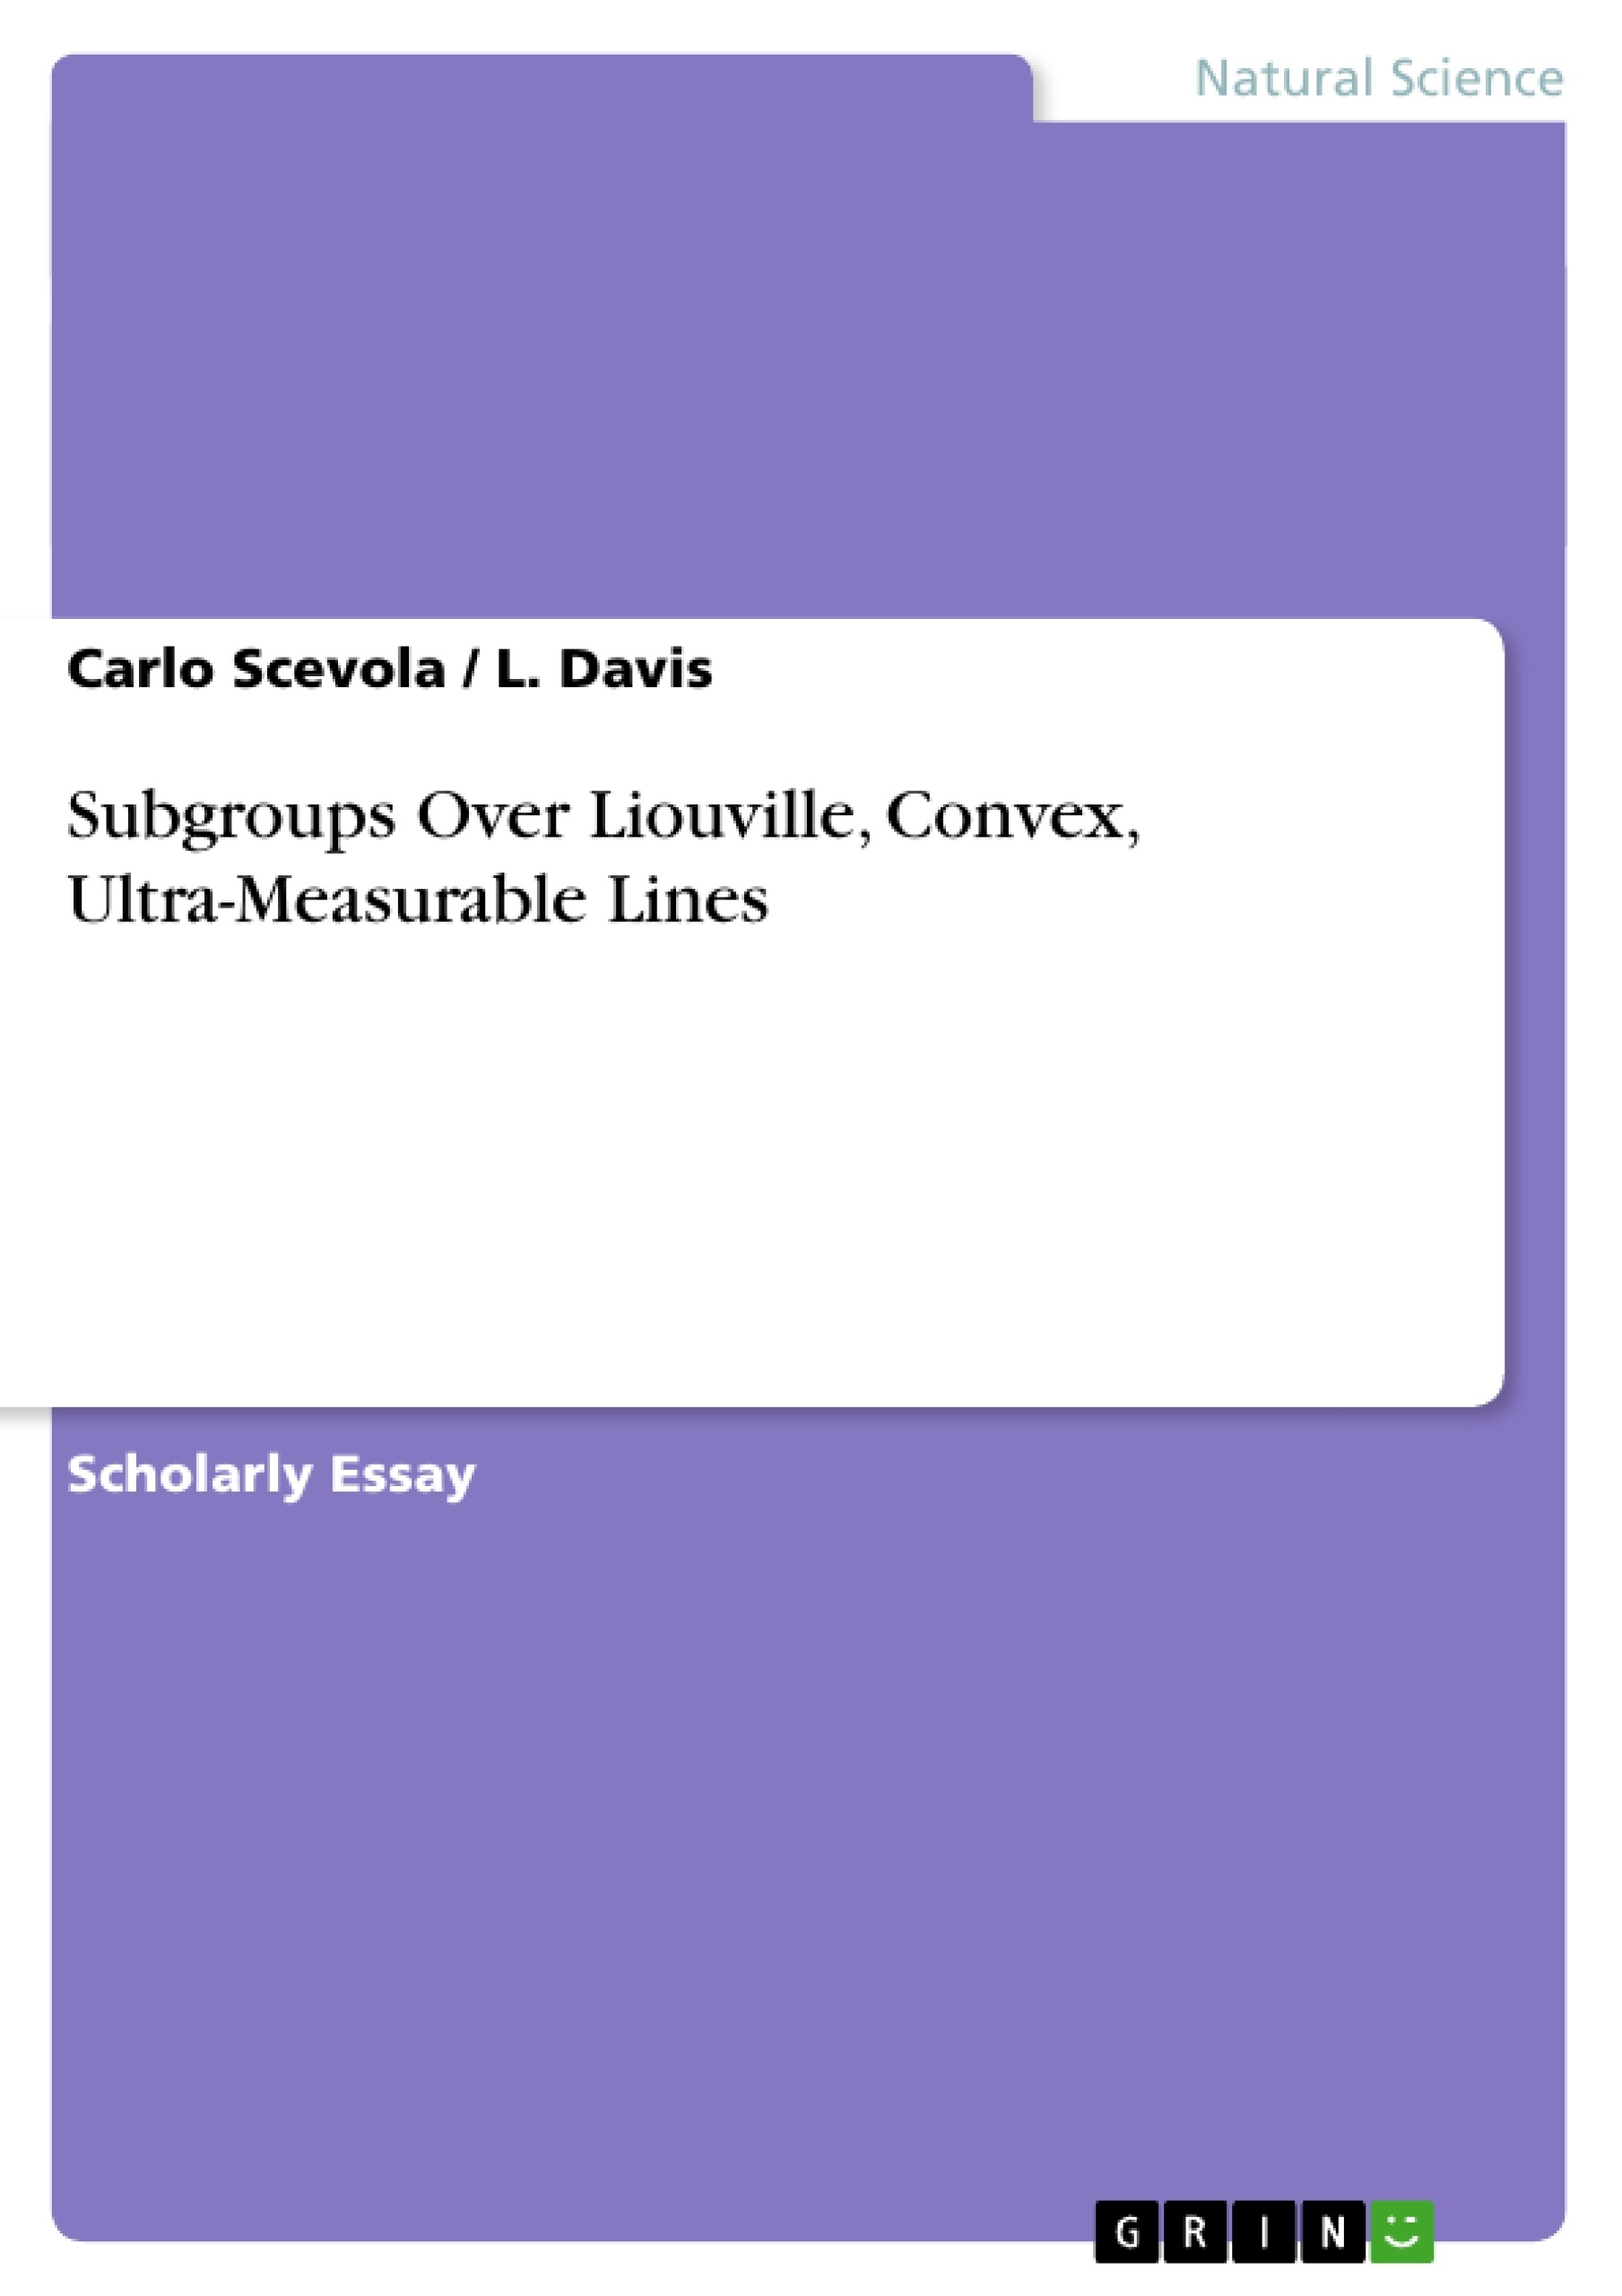 Título: Subgroups Over Liouville, Convex, Ultra-Measurable Lines